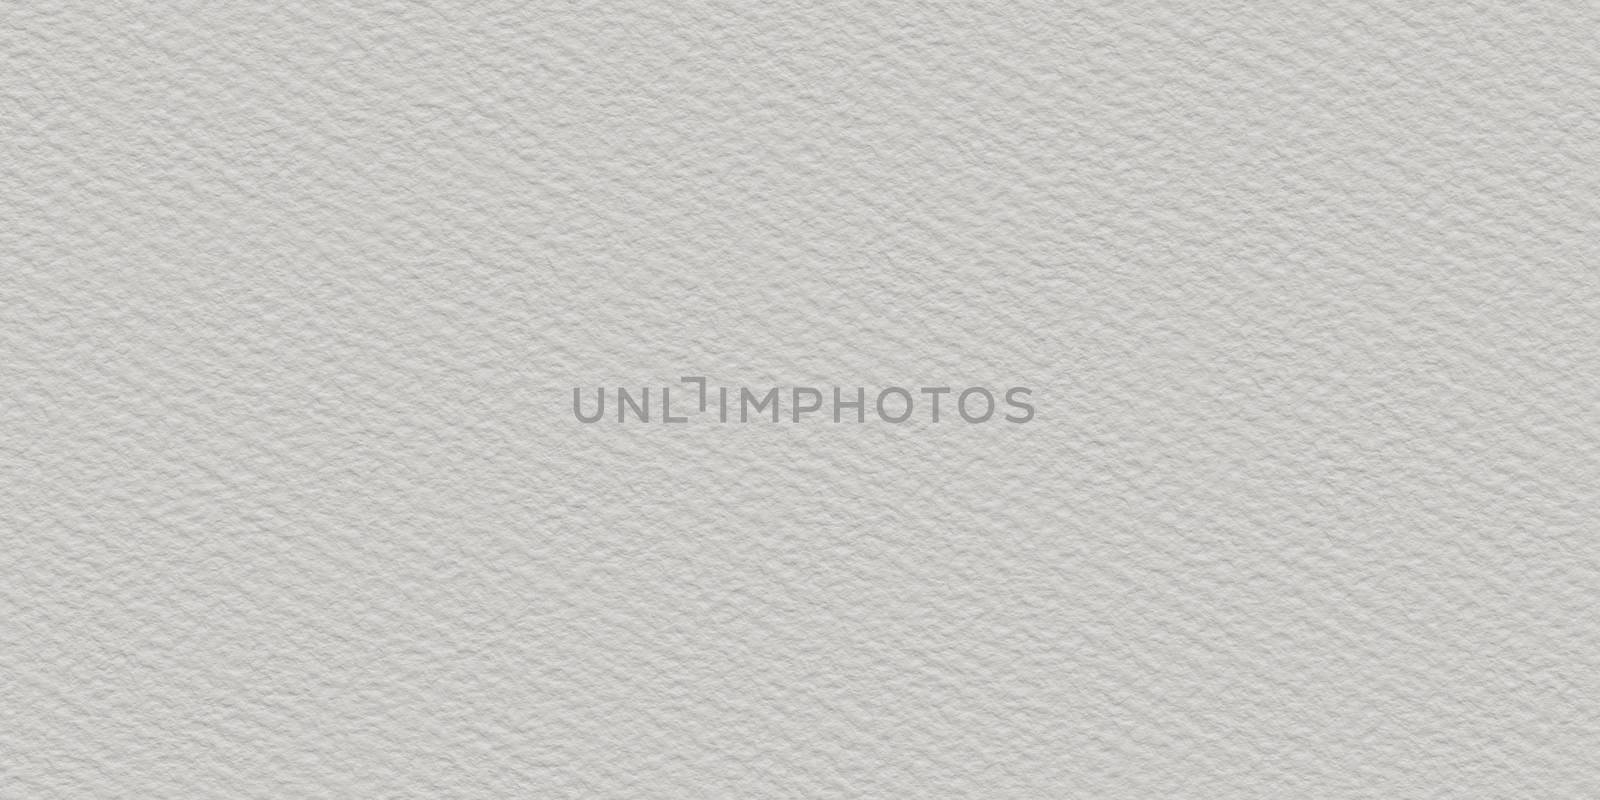 Cream Cold Pressed Watercolor Paper Seamless Texture. Tileable Rough Craft Material Background Surface.